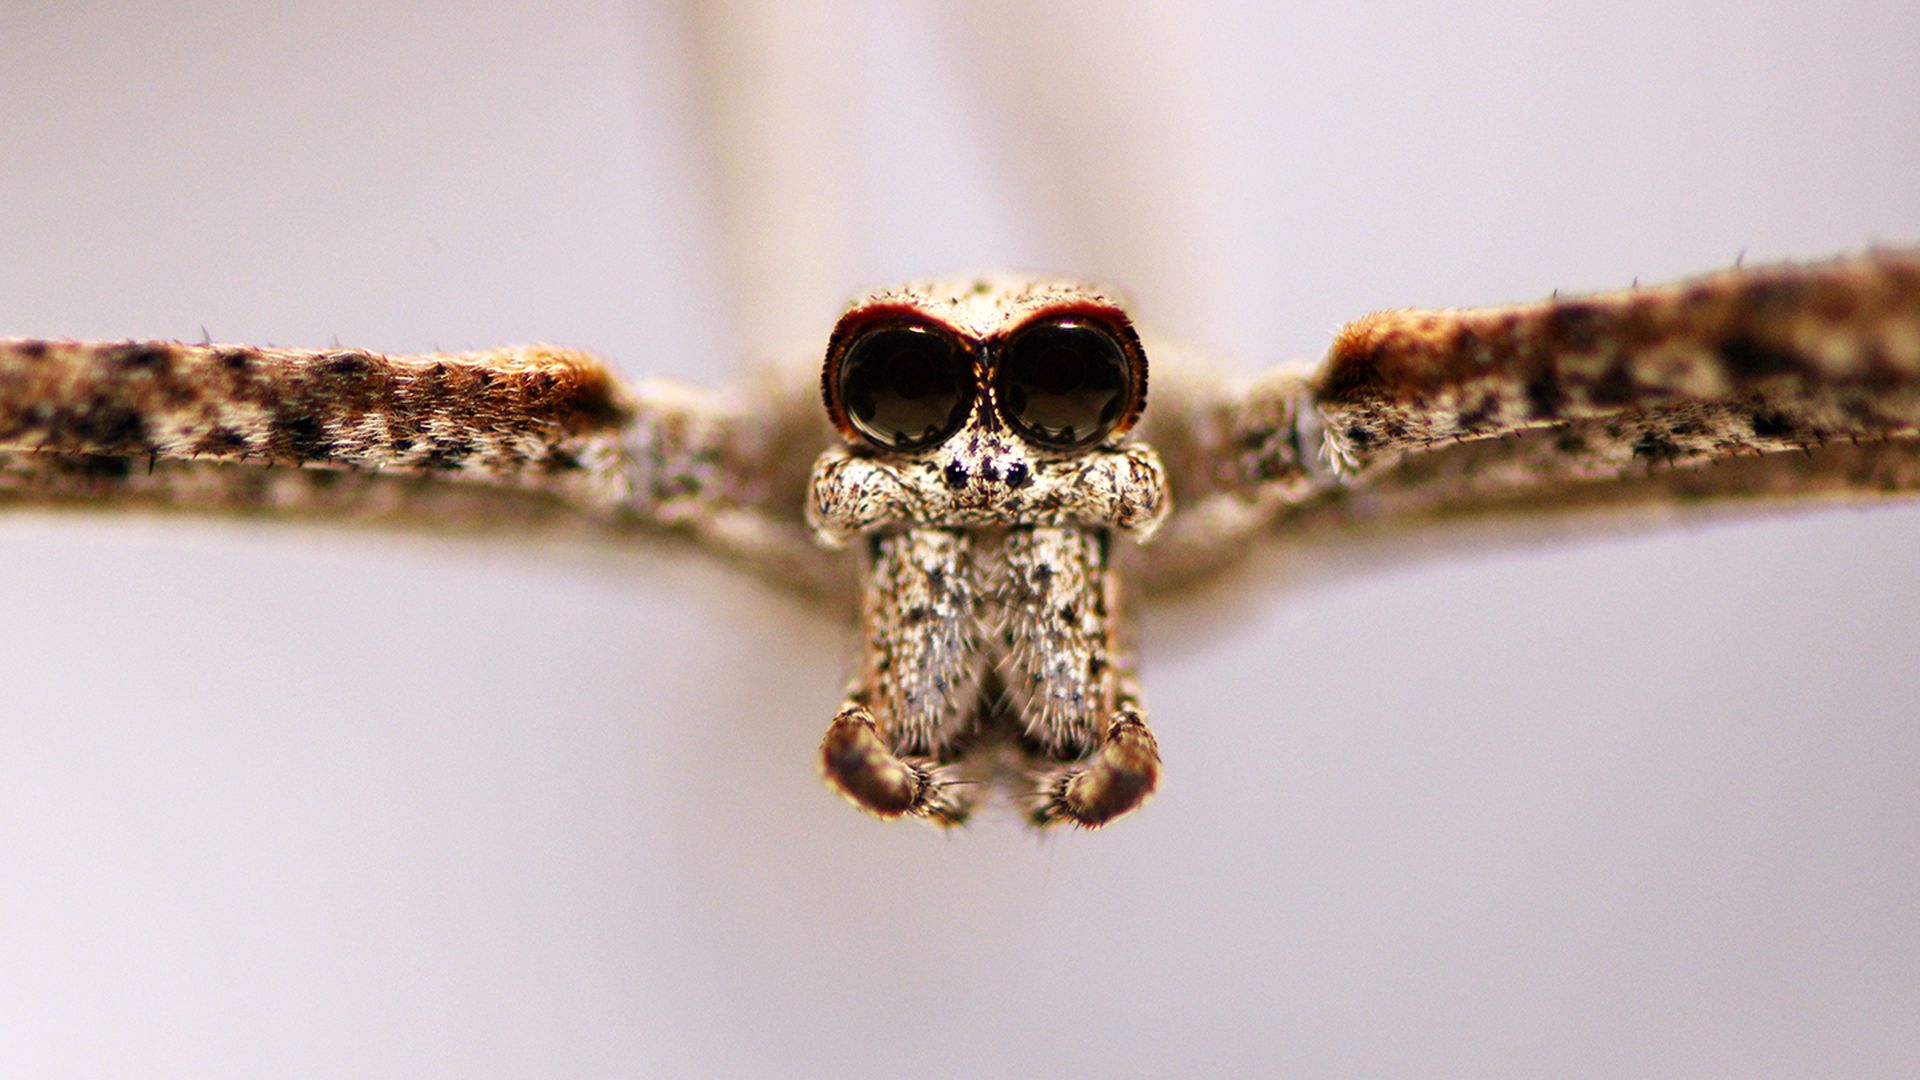 Front view of ogre-faced spider